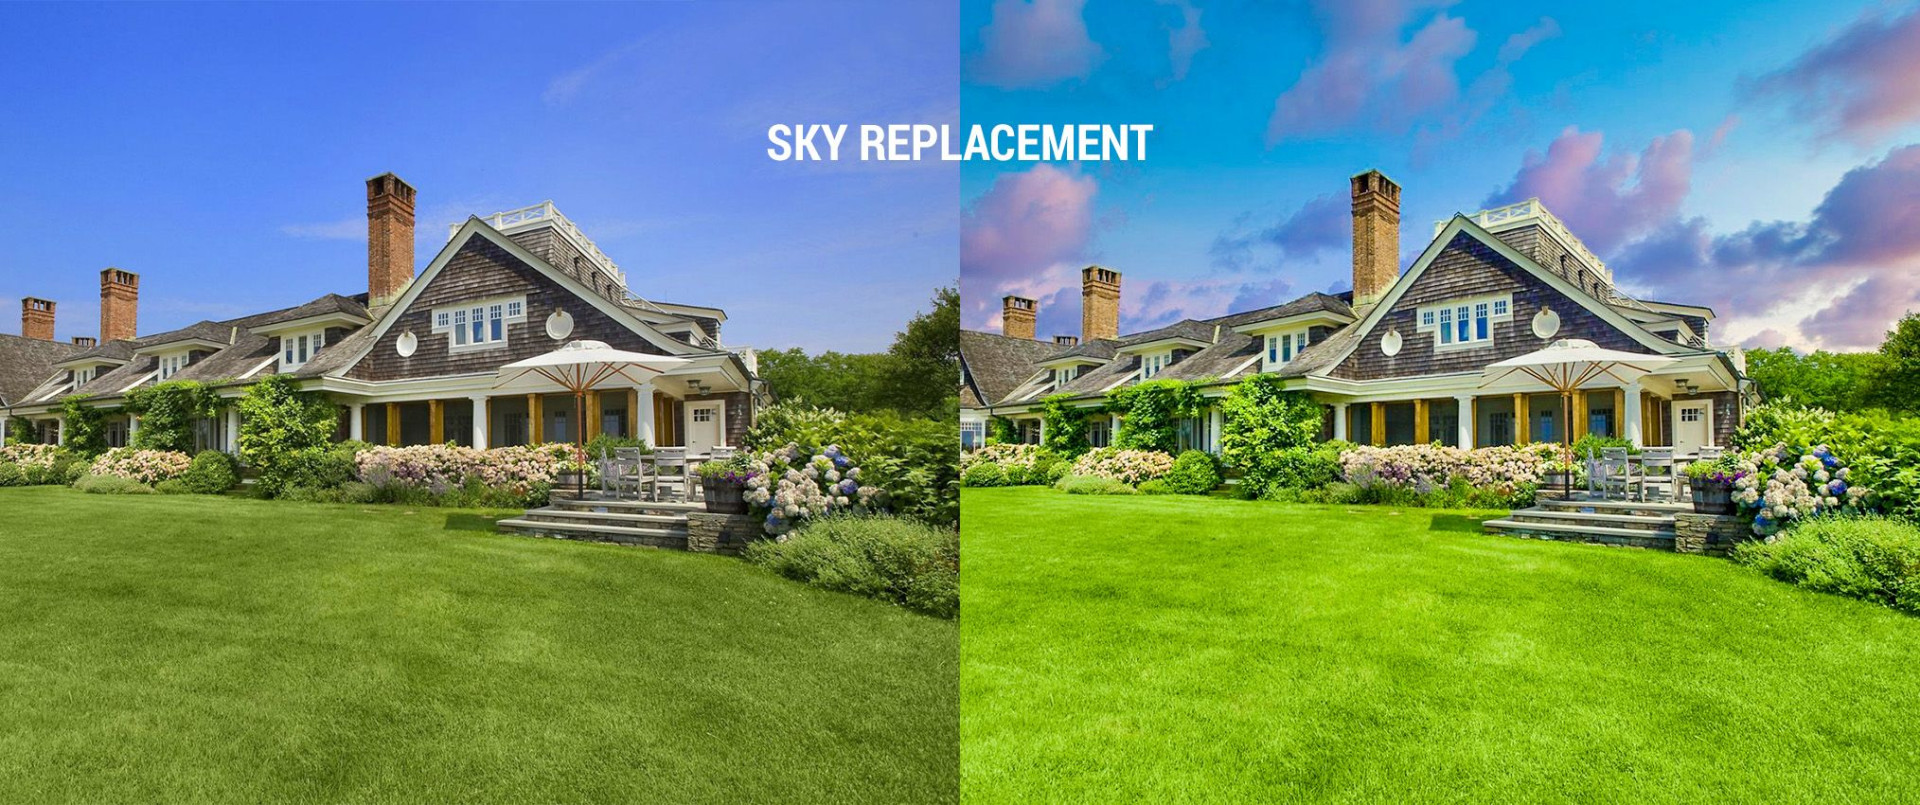 Sky Replacement 2